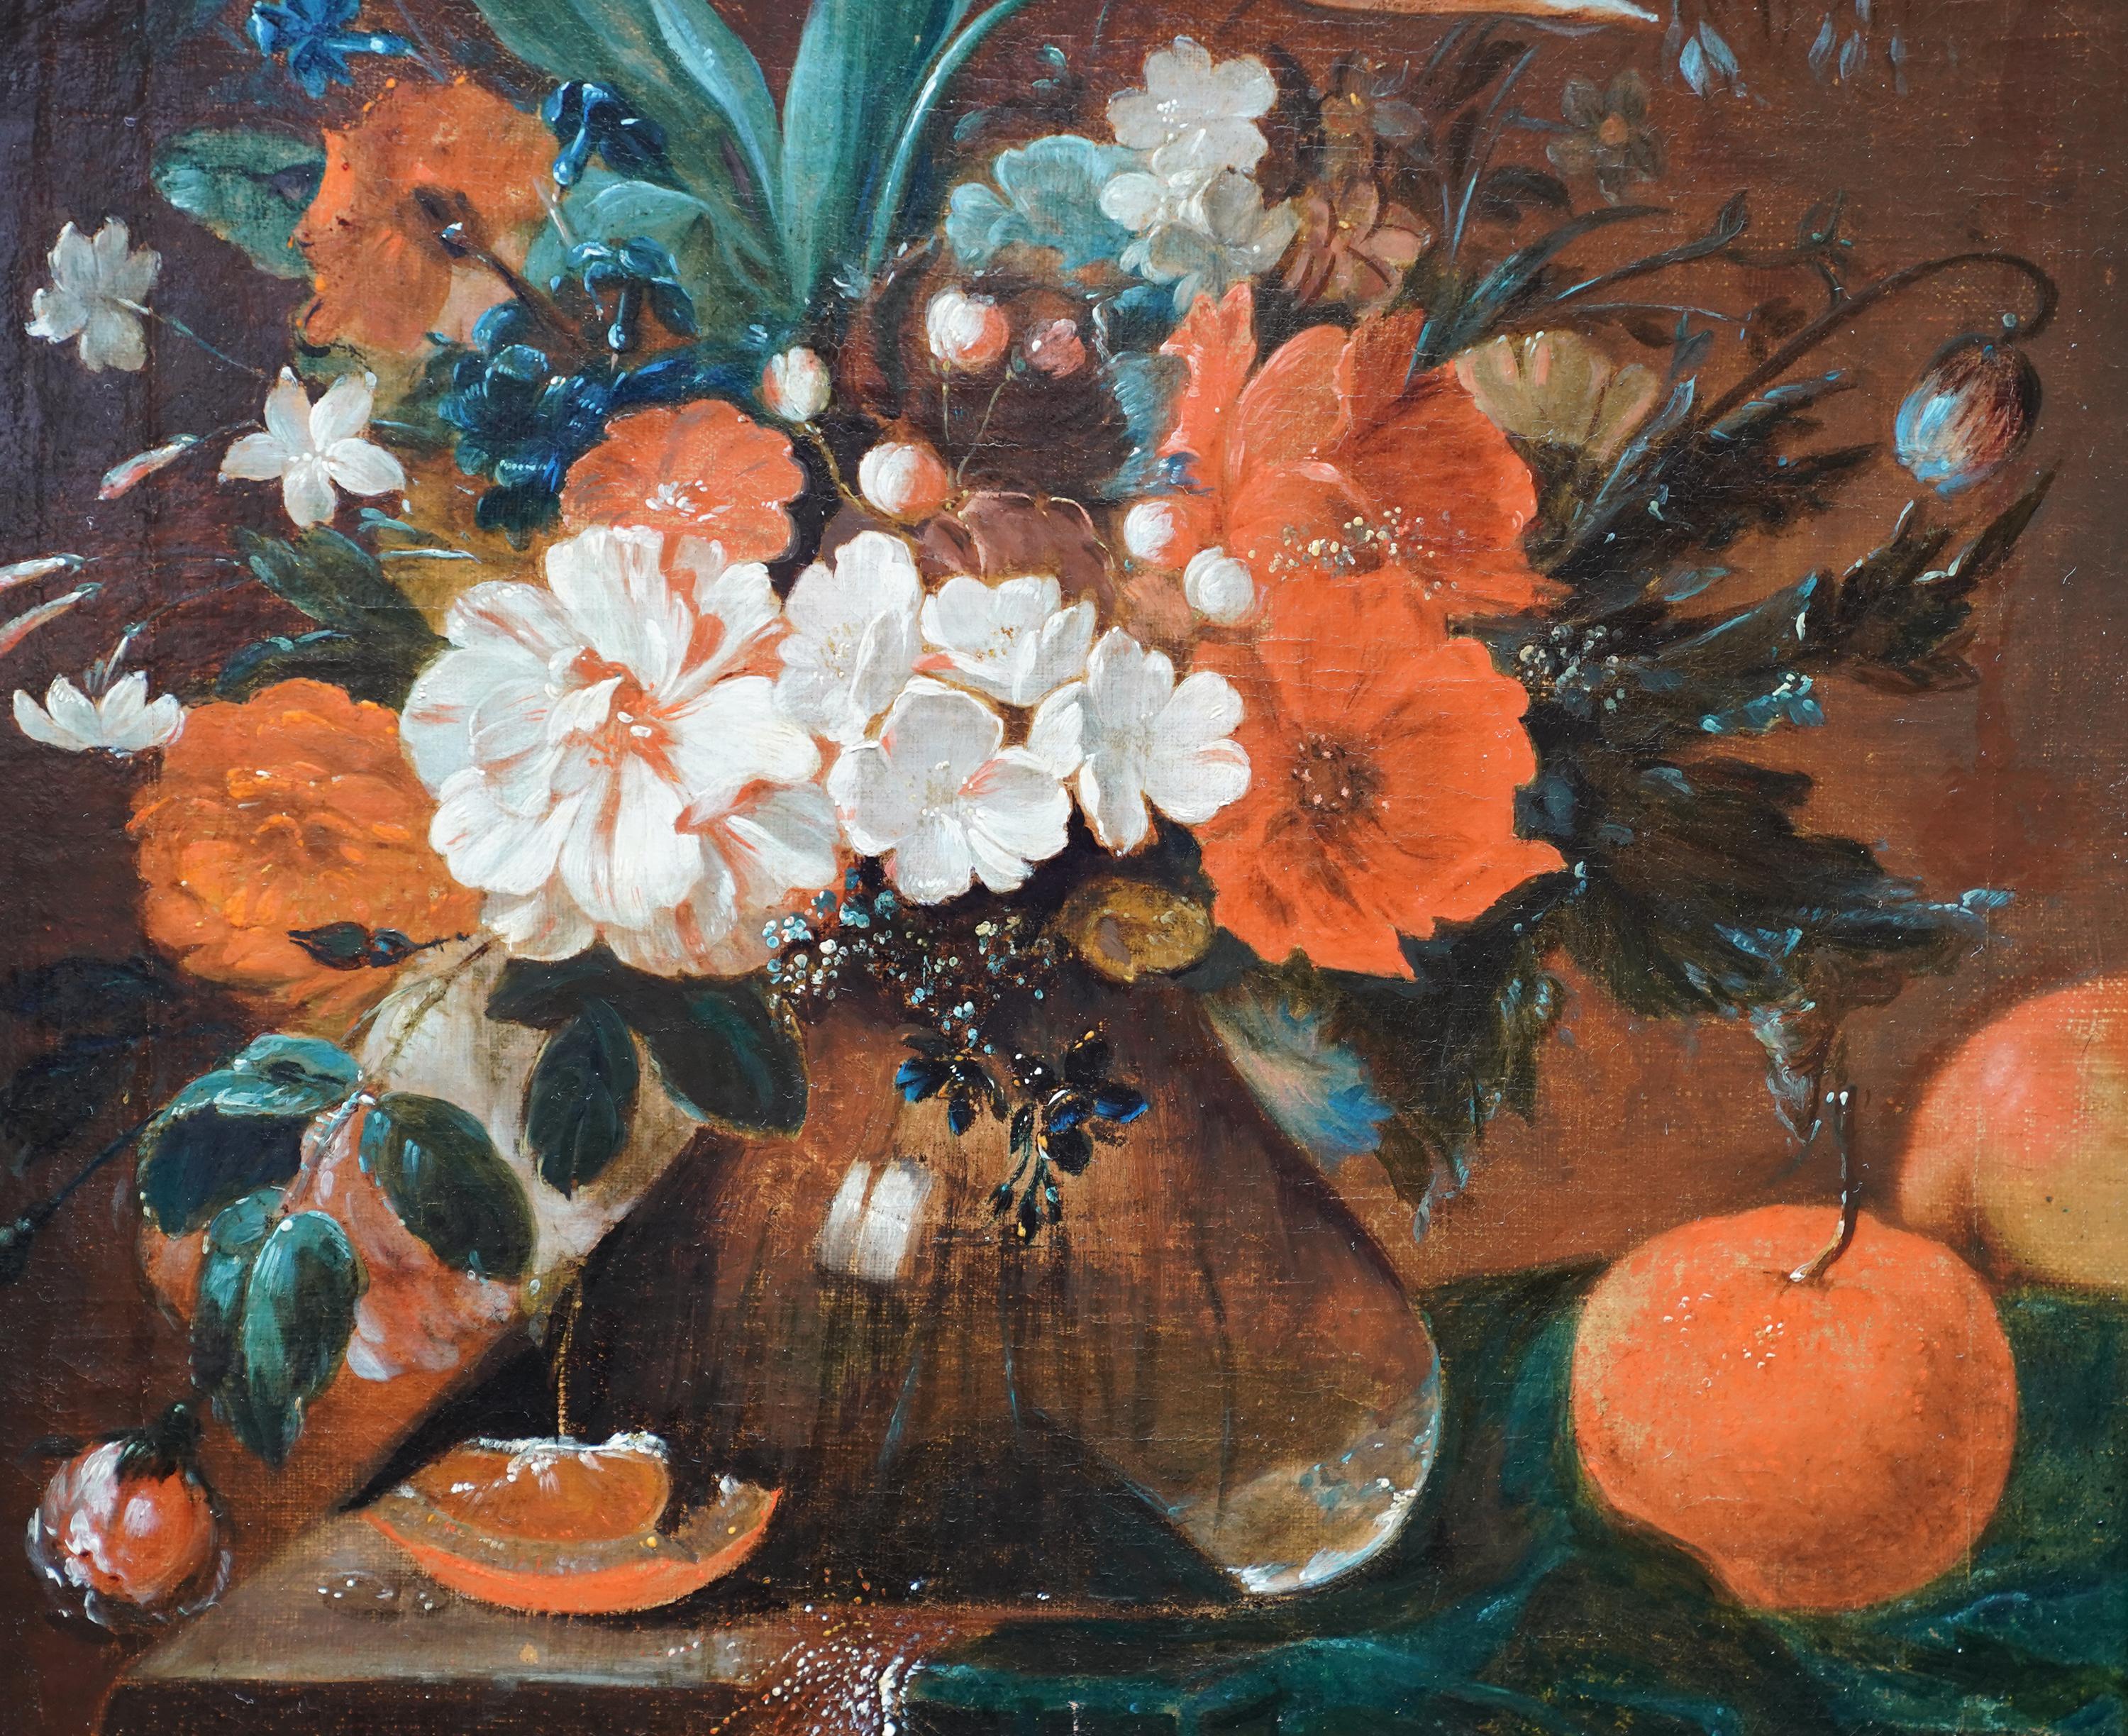 This superb Dutch Old Master floral still life oil painting is attributed to circle of Simon Pietersz Verelst. Painted circa 1700 the composition is a glass vase of mixed mostly red and white flowers on a table and fringed cloth with two apples next